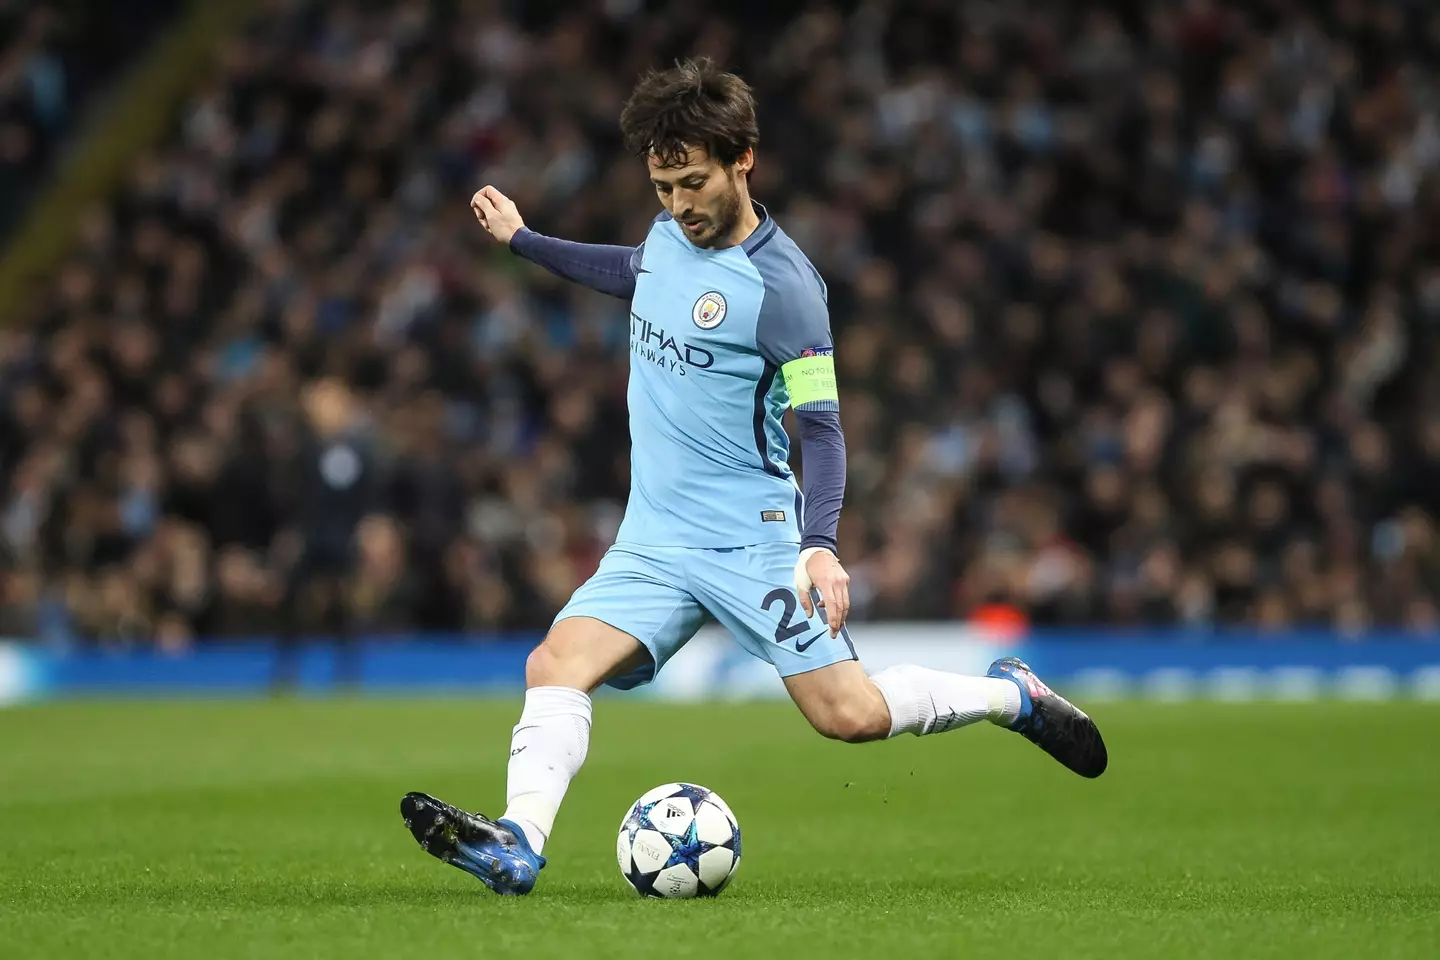 Carragher claims City denied him an interview with David Silva because of his links to Liverpool (Image: Alamy)